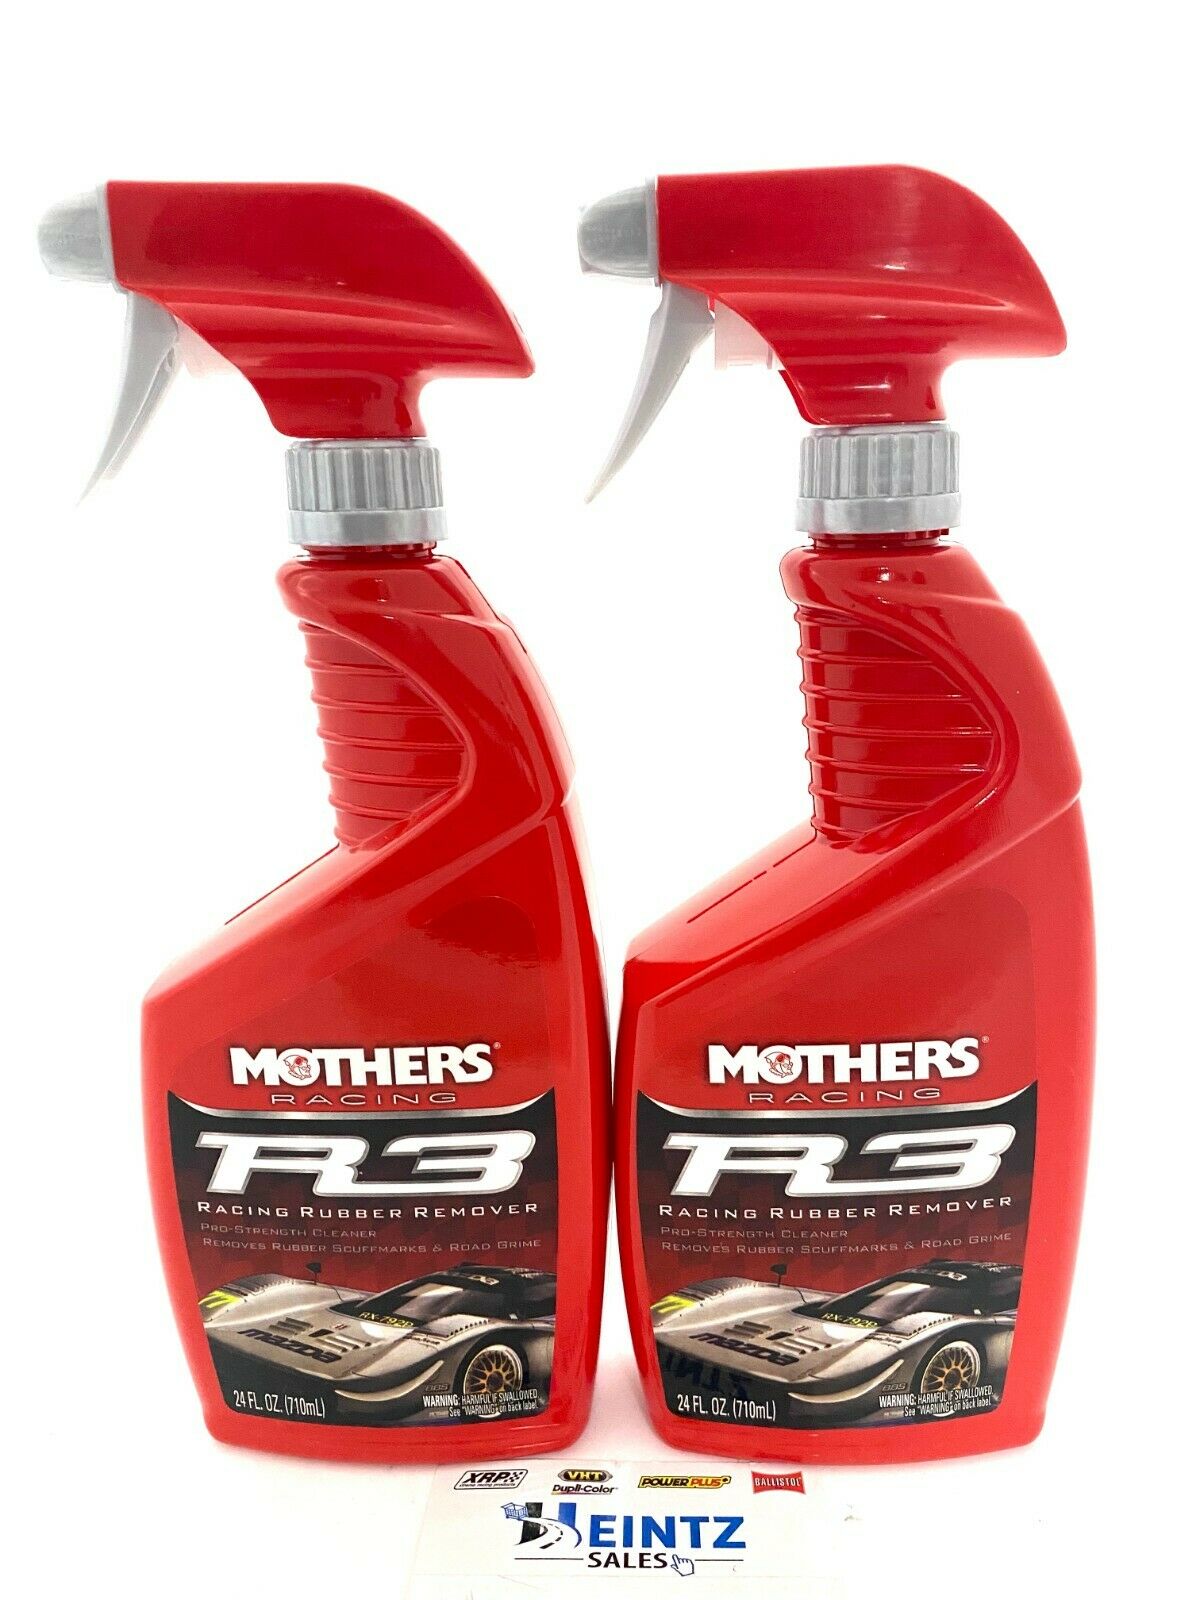 MOTHERS 09224 R3 - Racing Rubber Remover 2 PACK - Removes grime, dirt & soil - 24 oz.